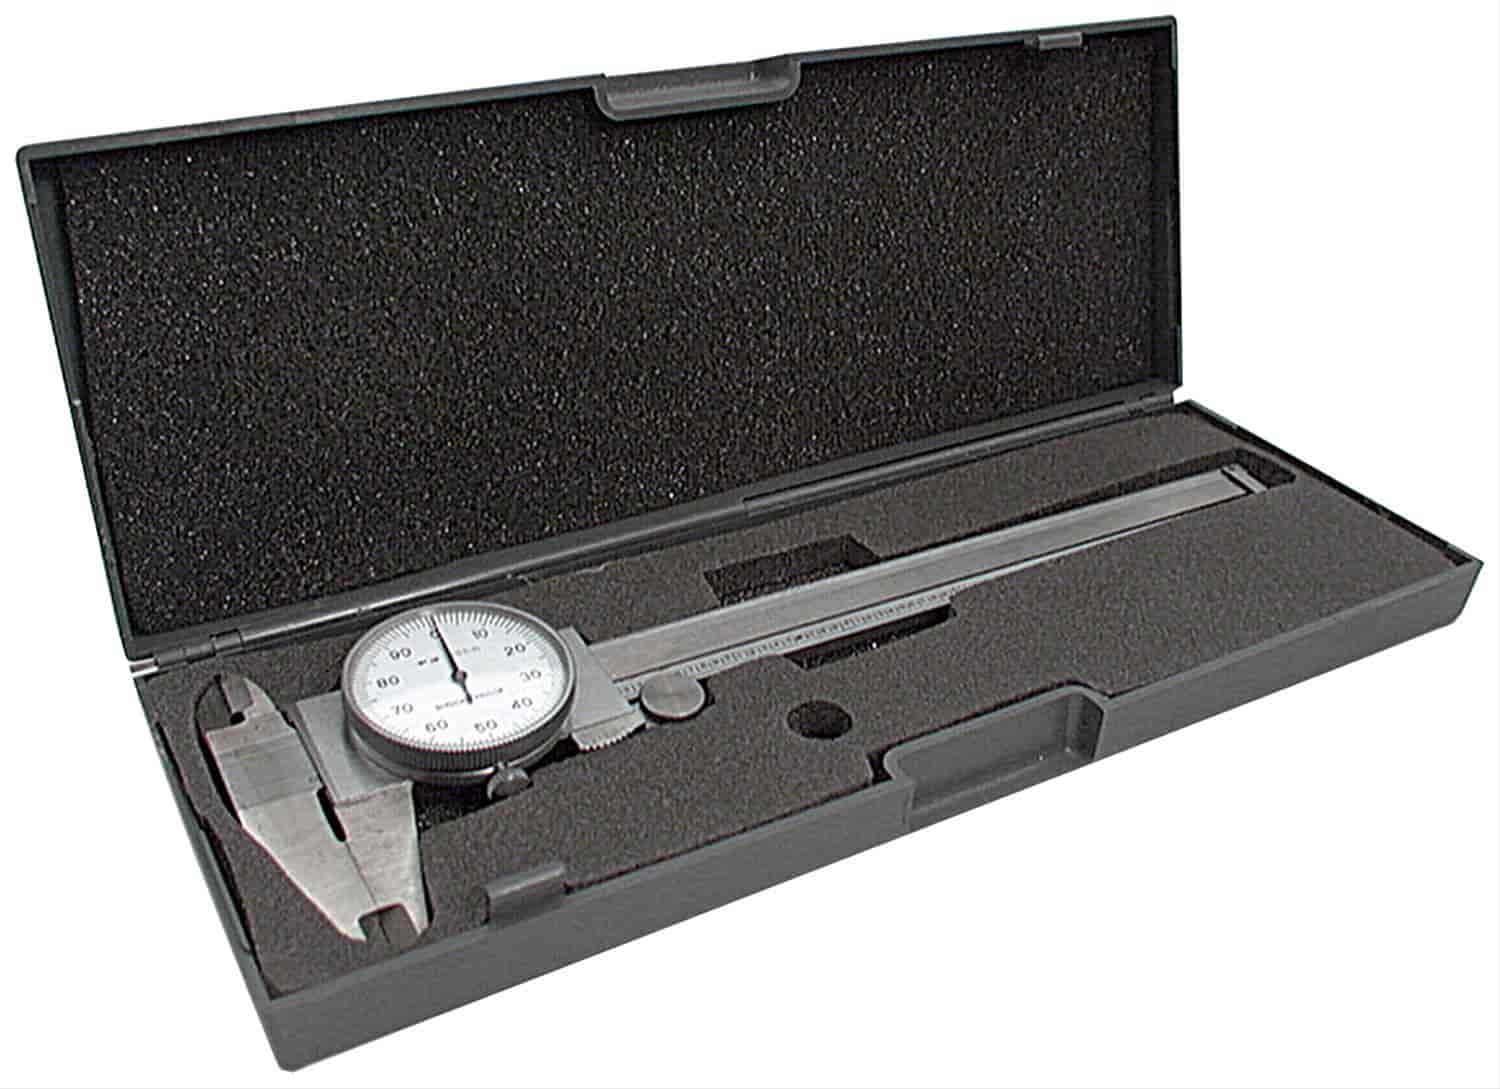 Dial Caliper Measures up to 6" Storage Case Included